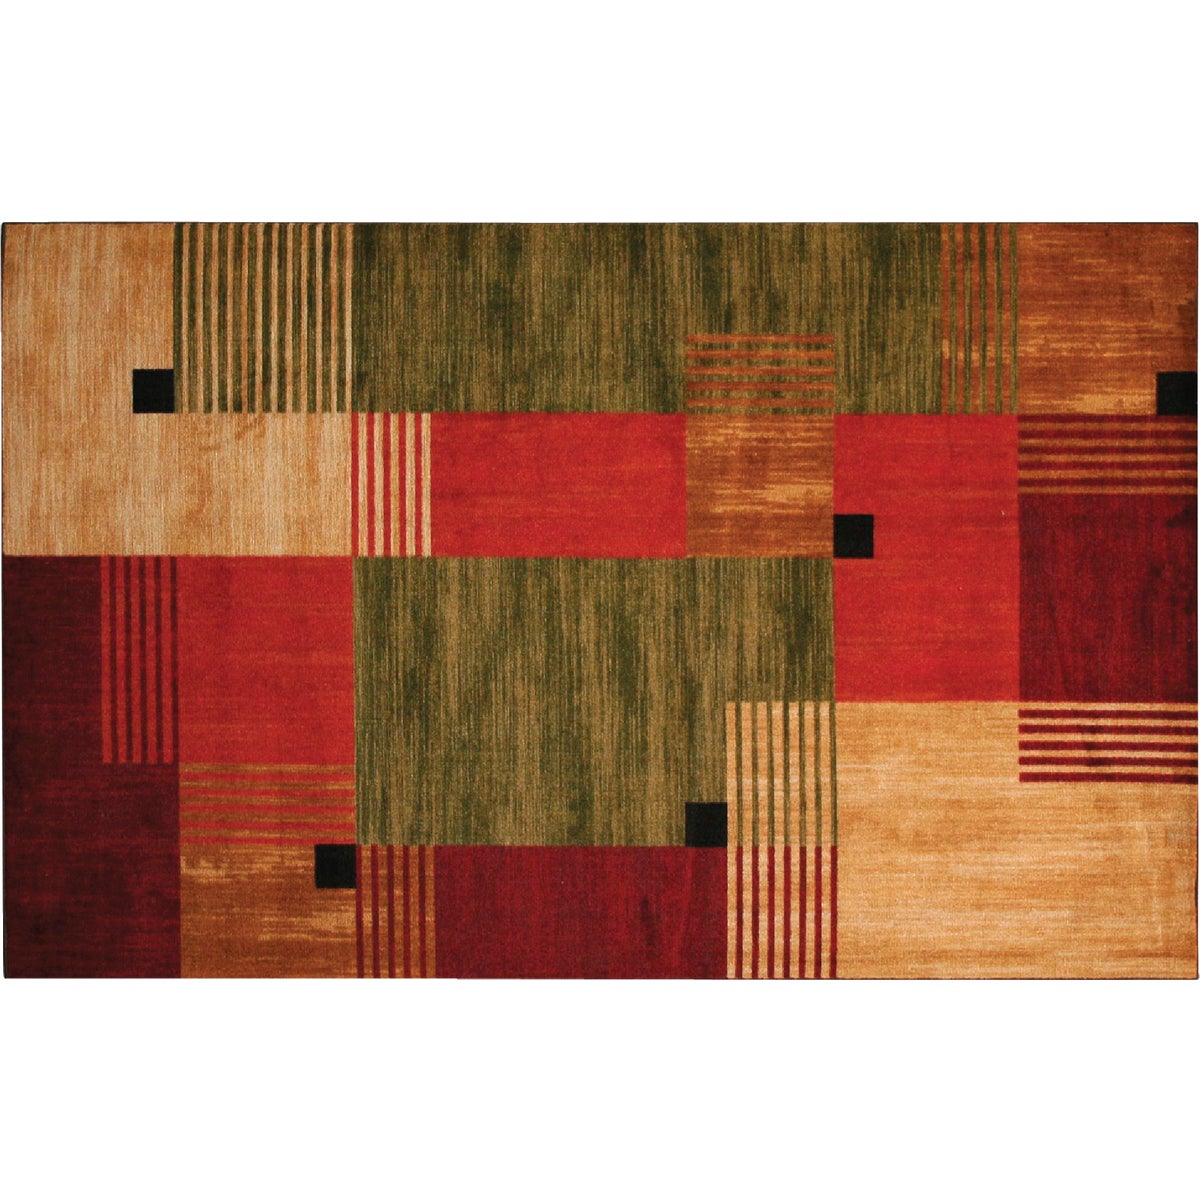 Mohawk Home Alliance Multi-Color 2 Ft. 6 In. x 3 Ft. 10 In. Accent Rug